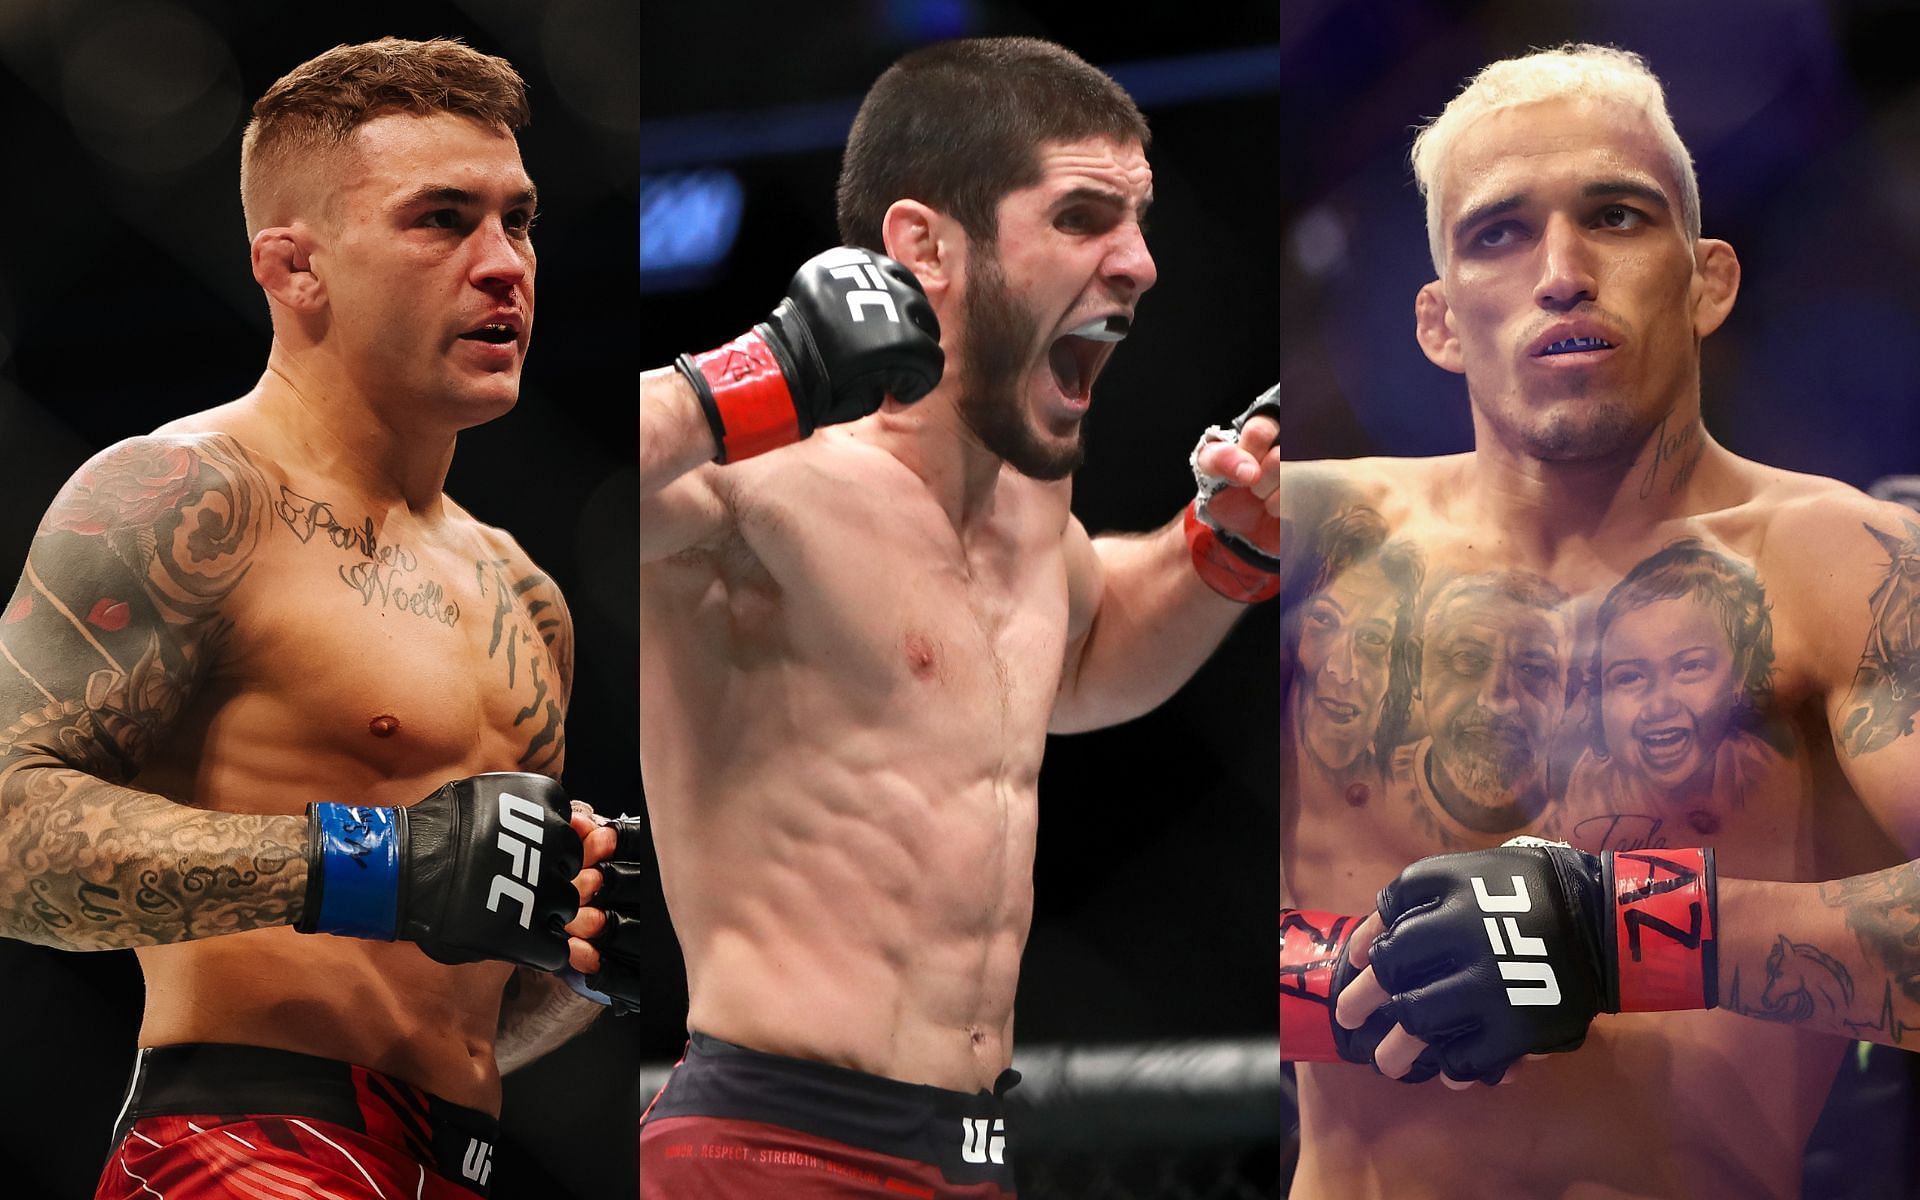 Dustin Poirier (Left), Islam Makhachev (Middle), and Charles Oliveira (Right)